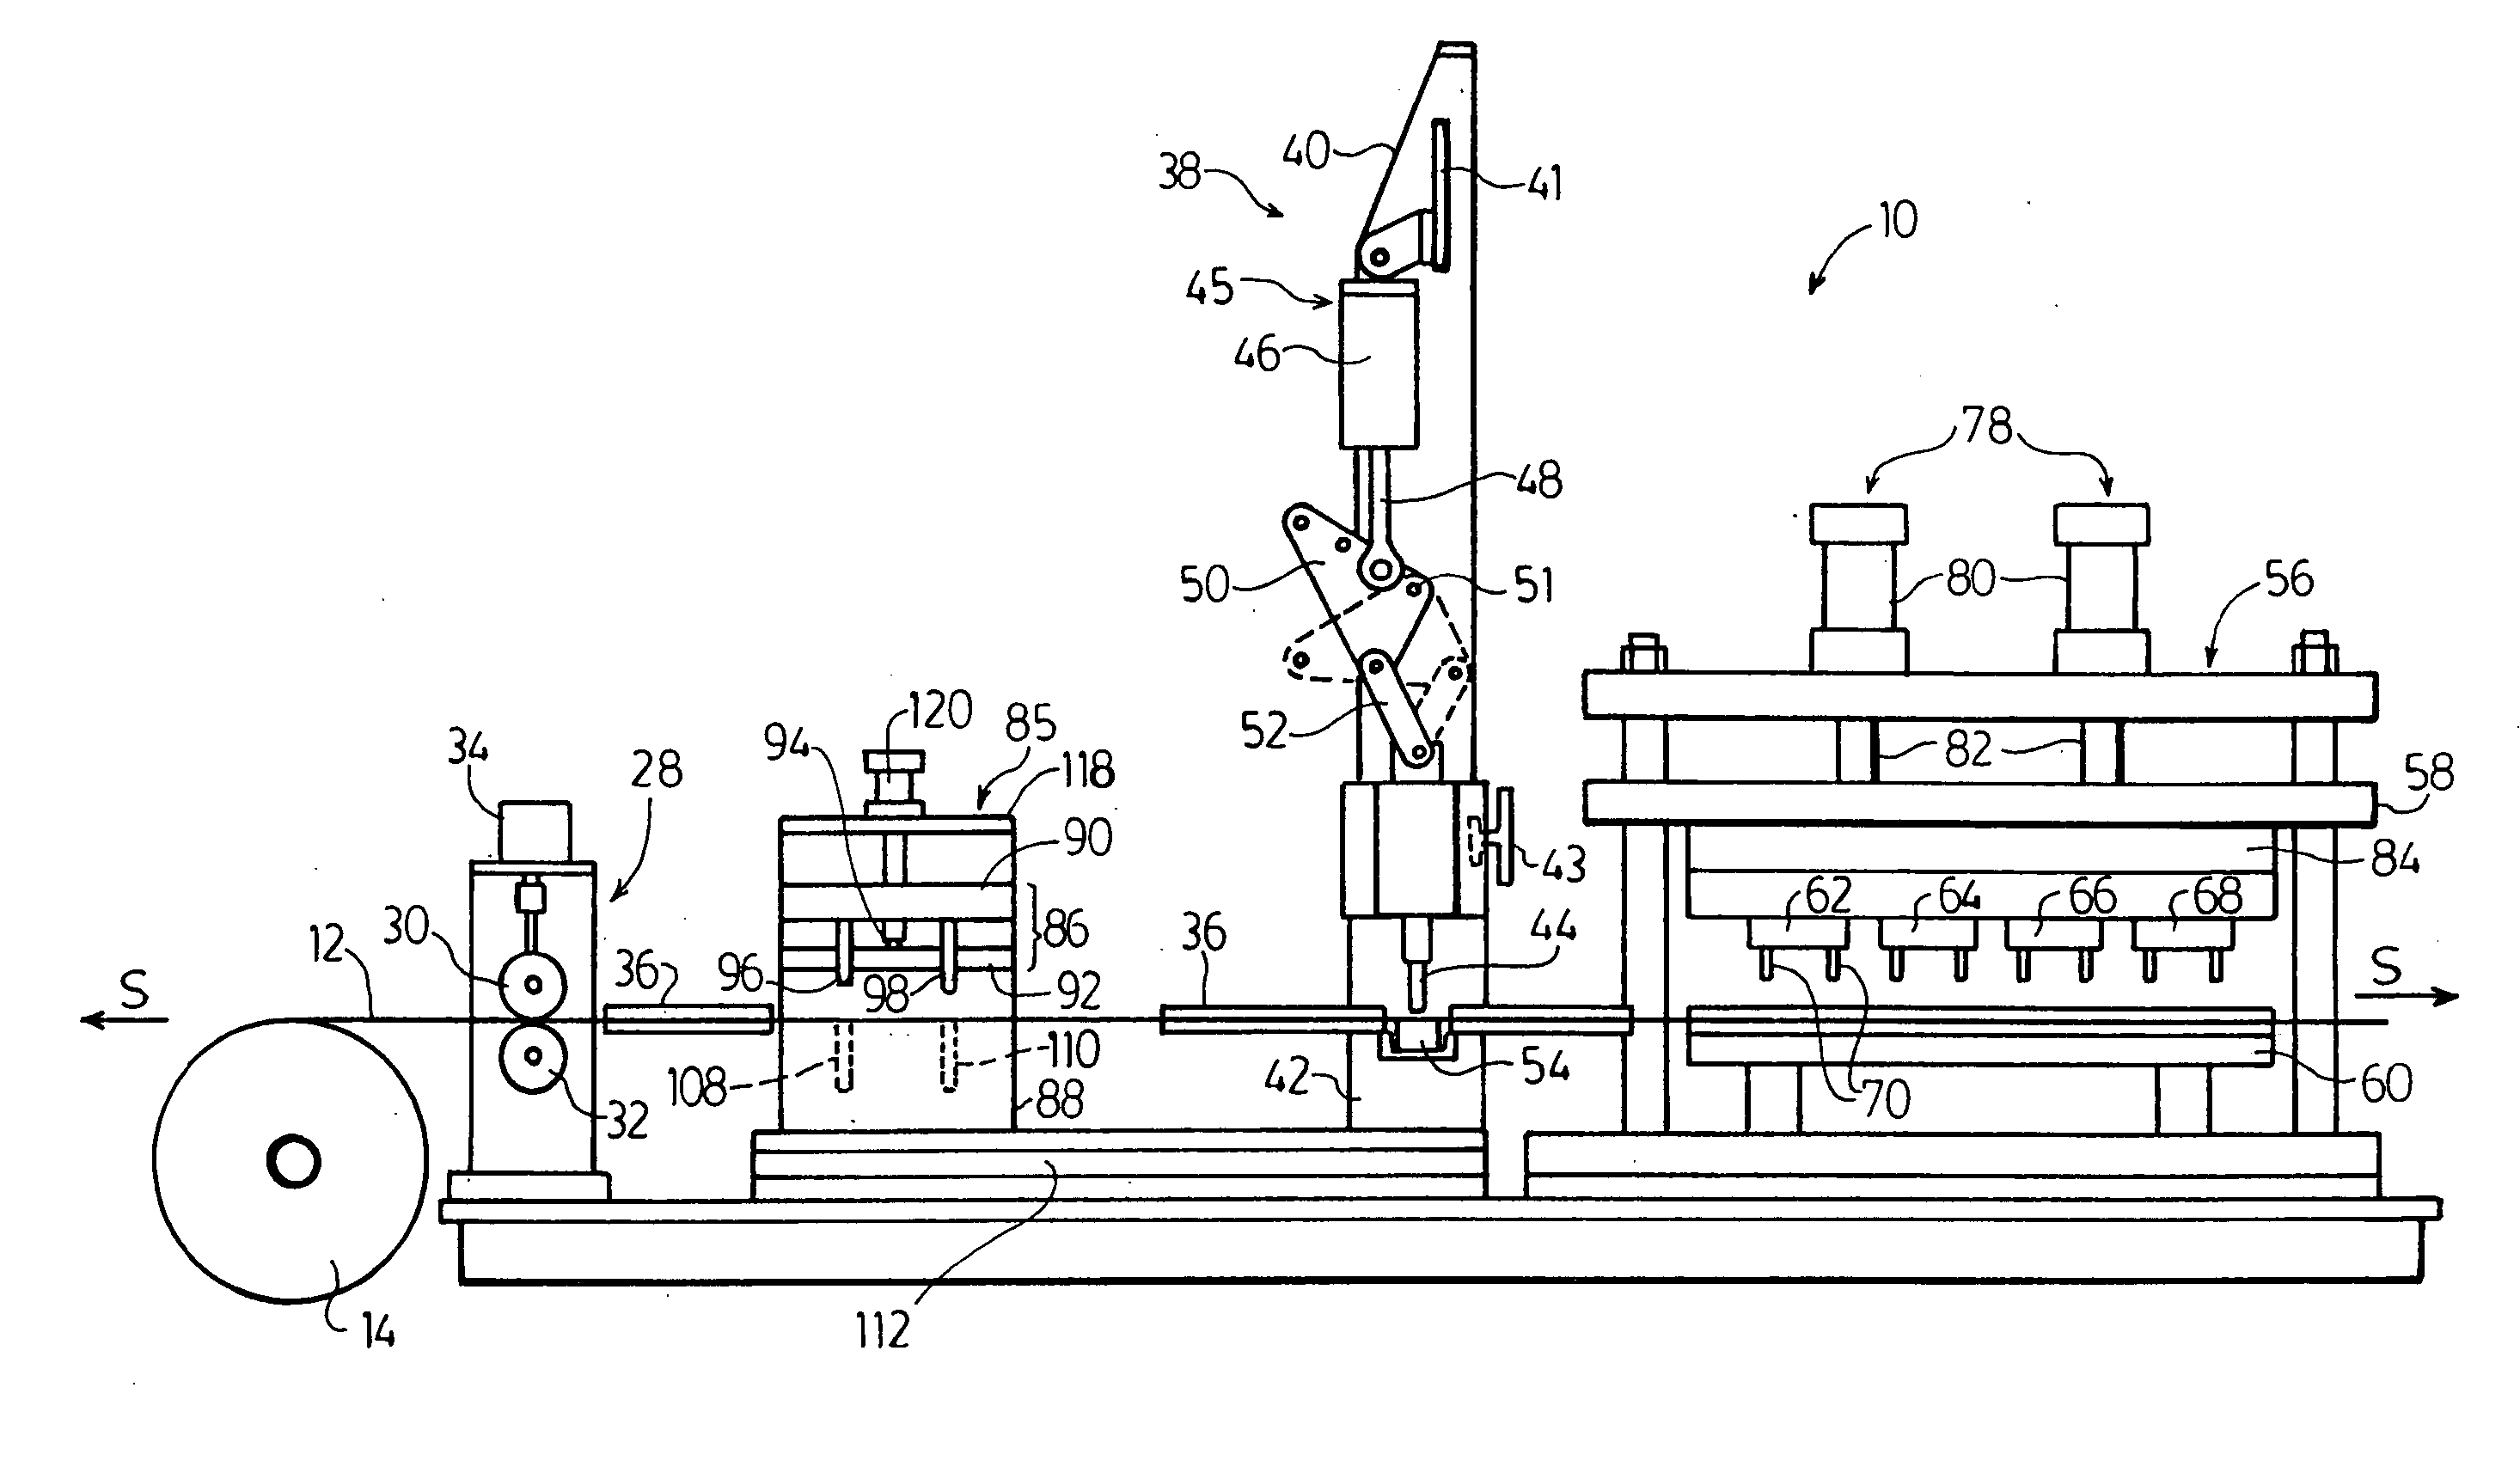 Apparatus and method for forming shaped articles